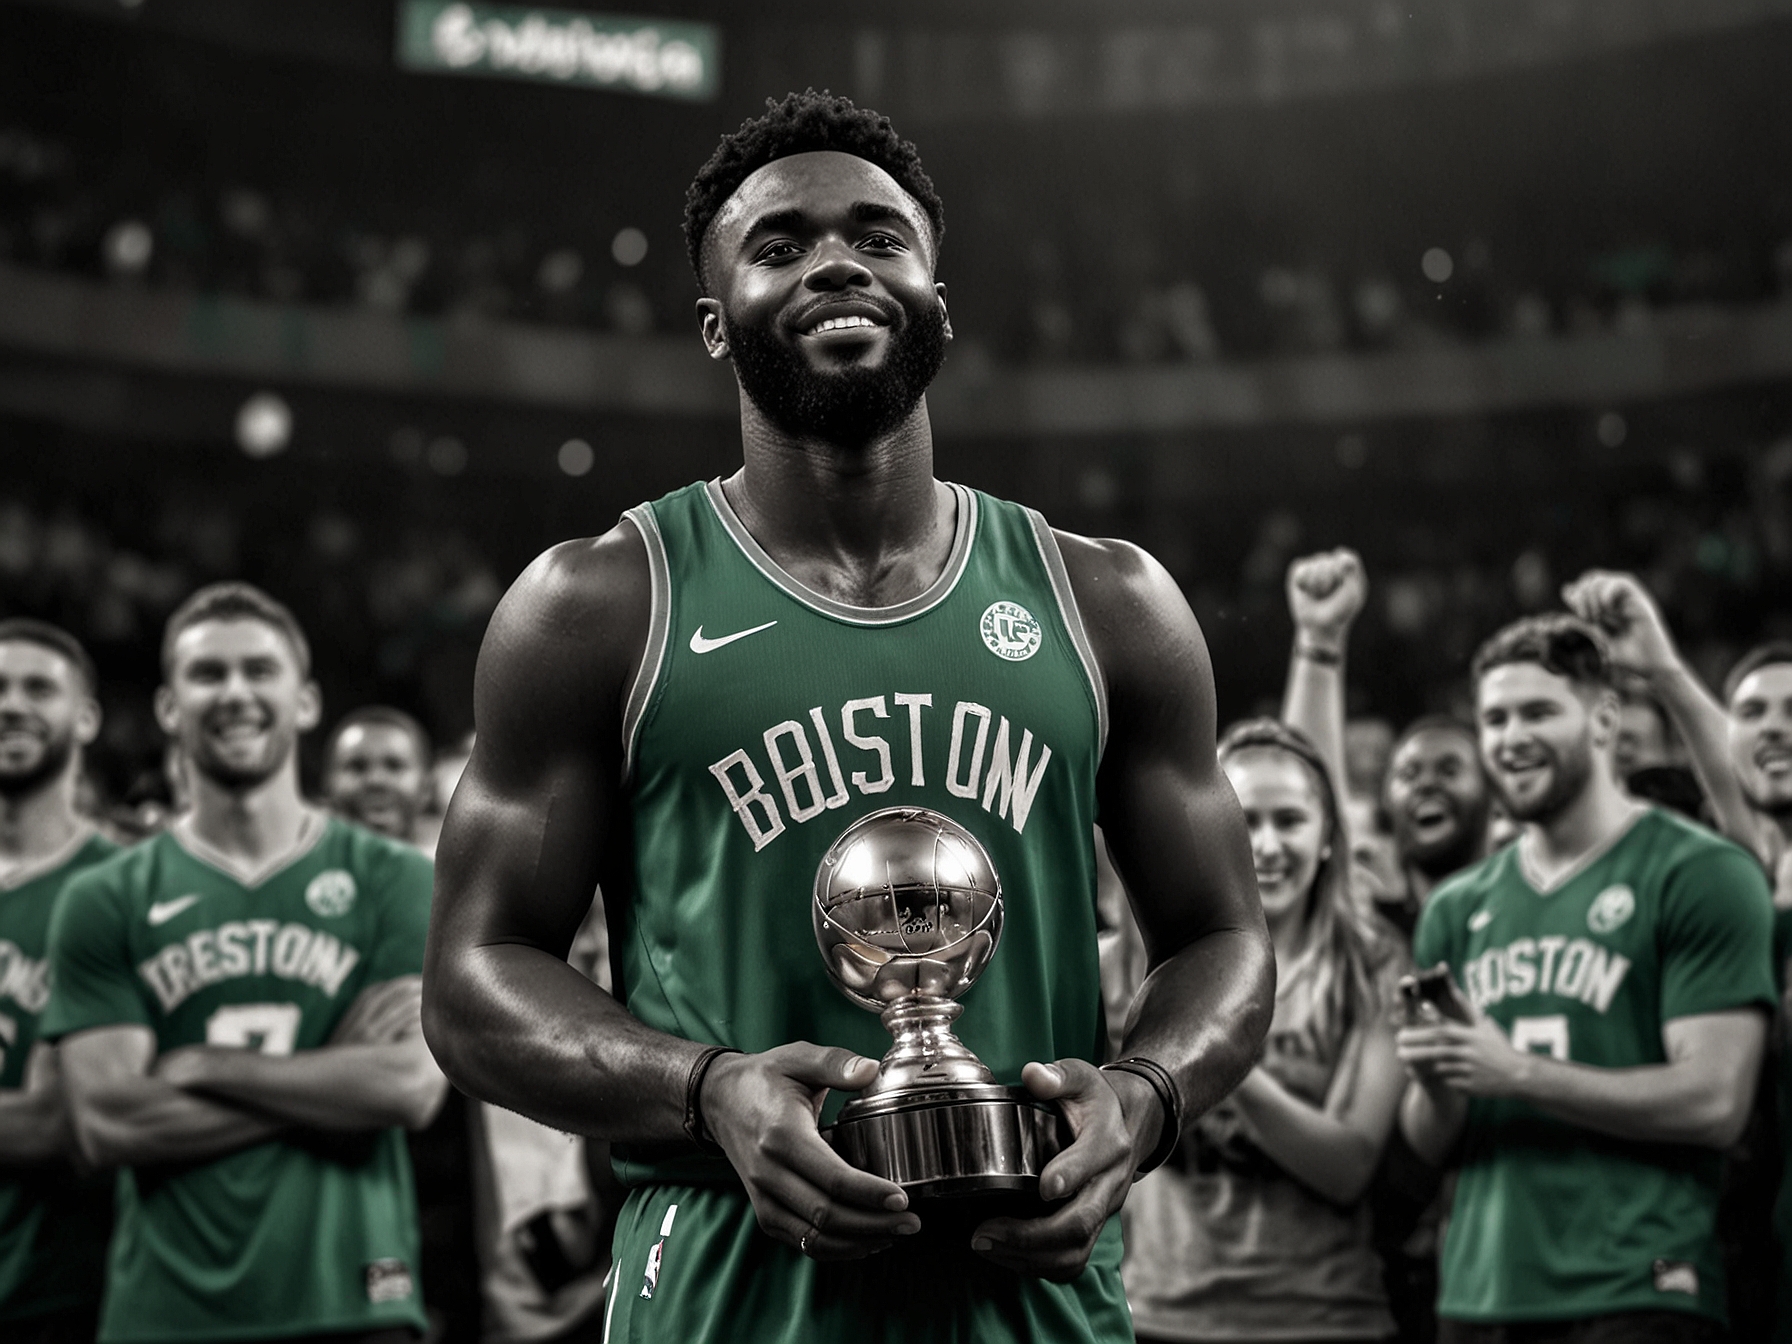 Jaylen Brown holds the Finals MVP trophy with a jubilant expression as Boston Celtics fans cheer in the background, celebrating the team's 2024 NBA Championship victory.